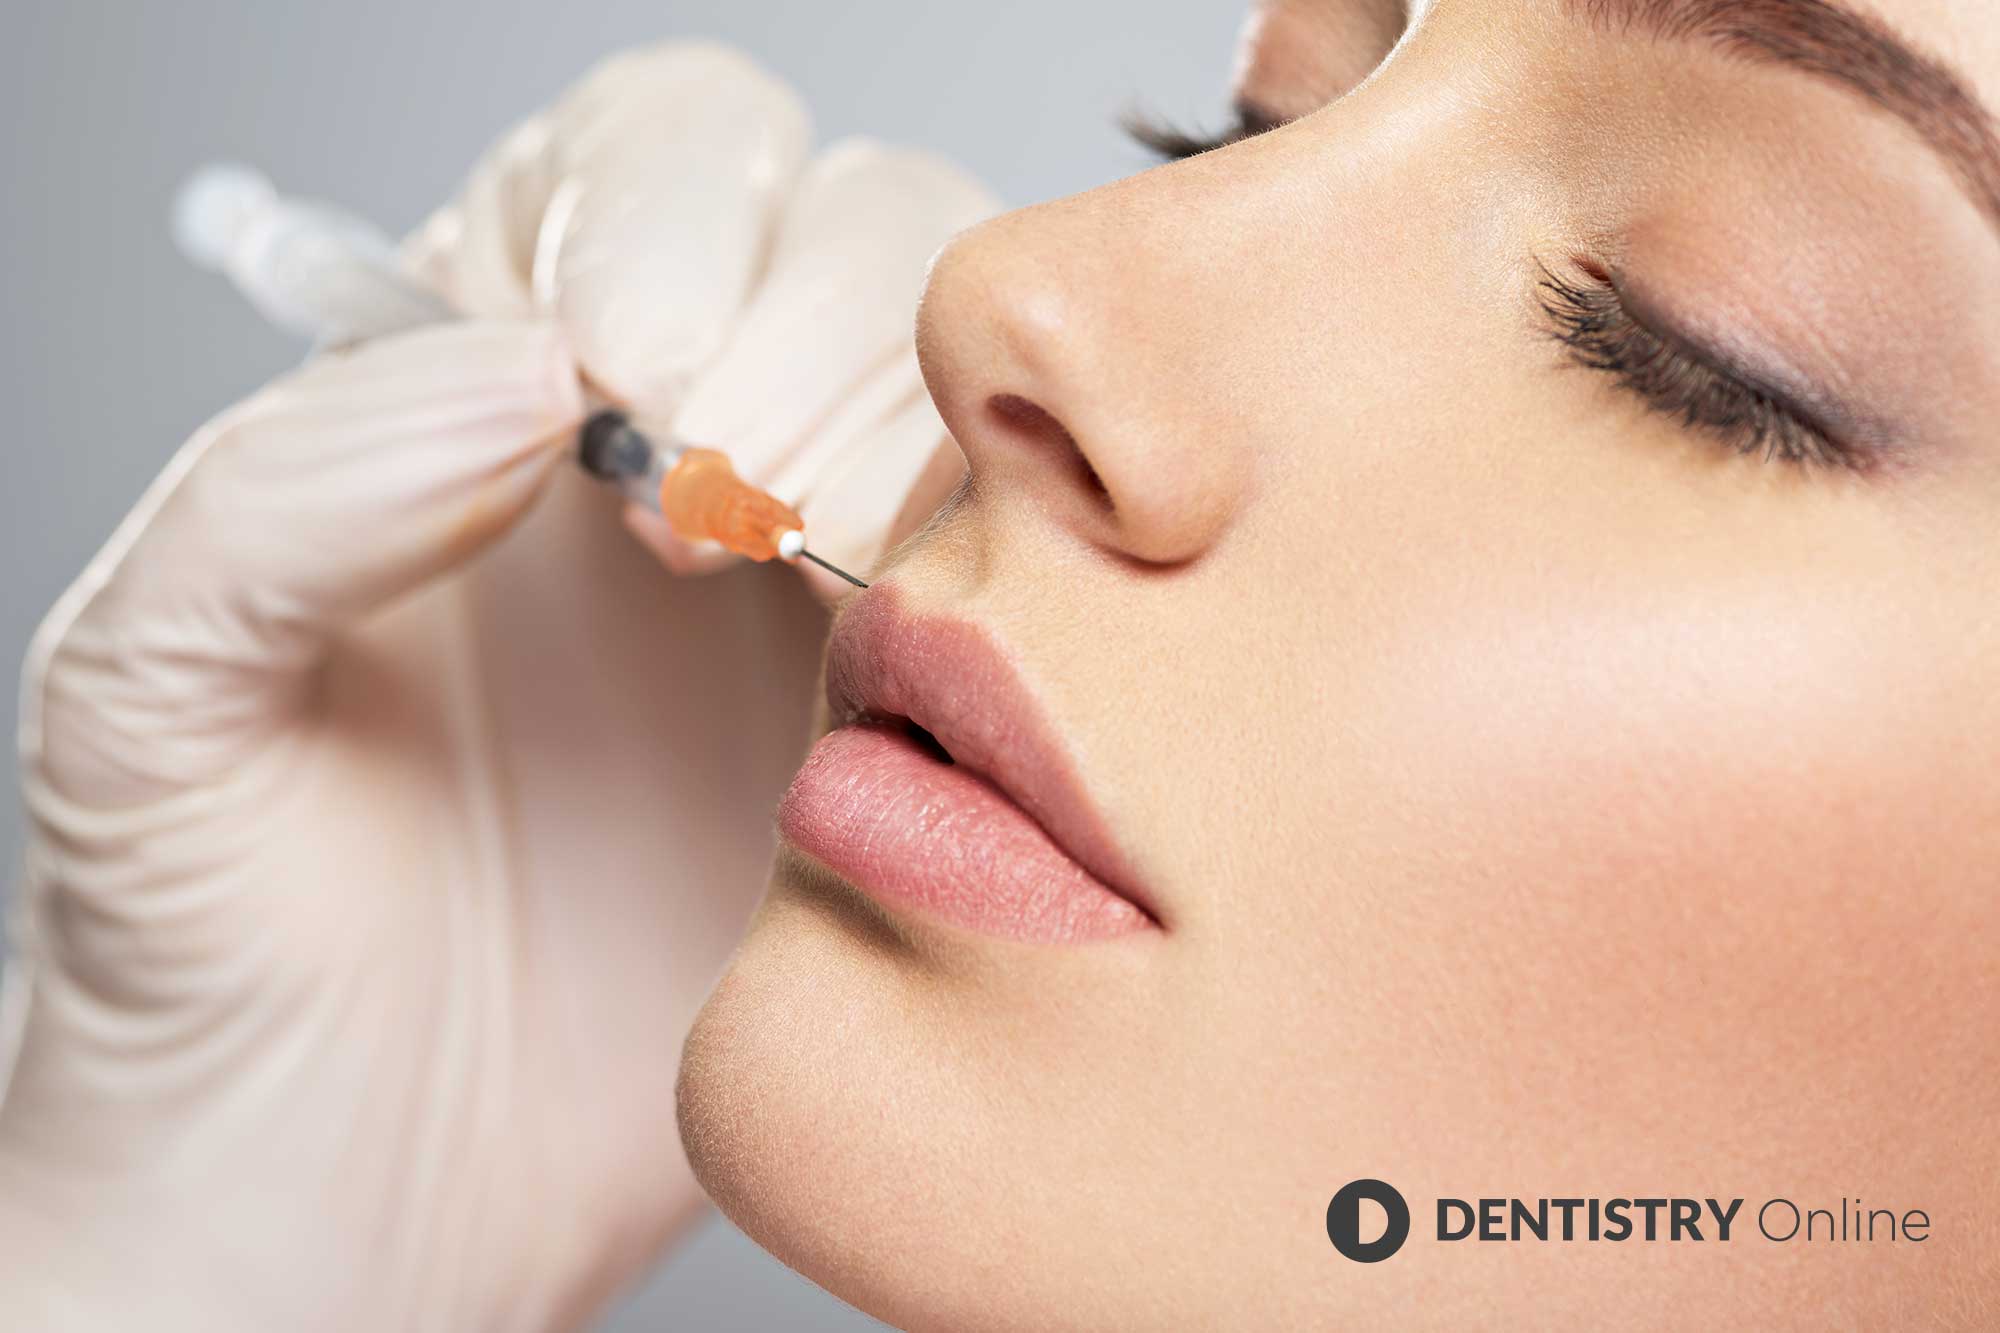 Members of parliament are calling for a ban on Botox and lip fillers for those under the age of 18